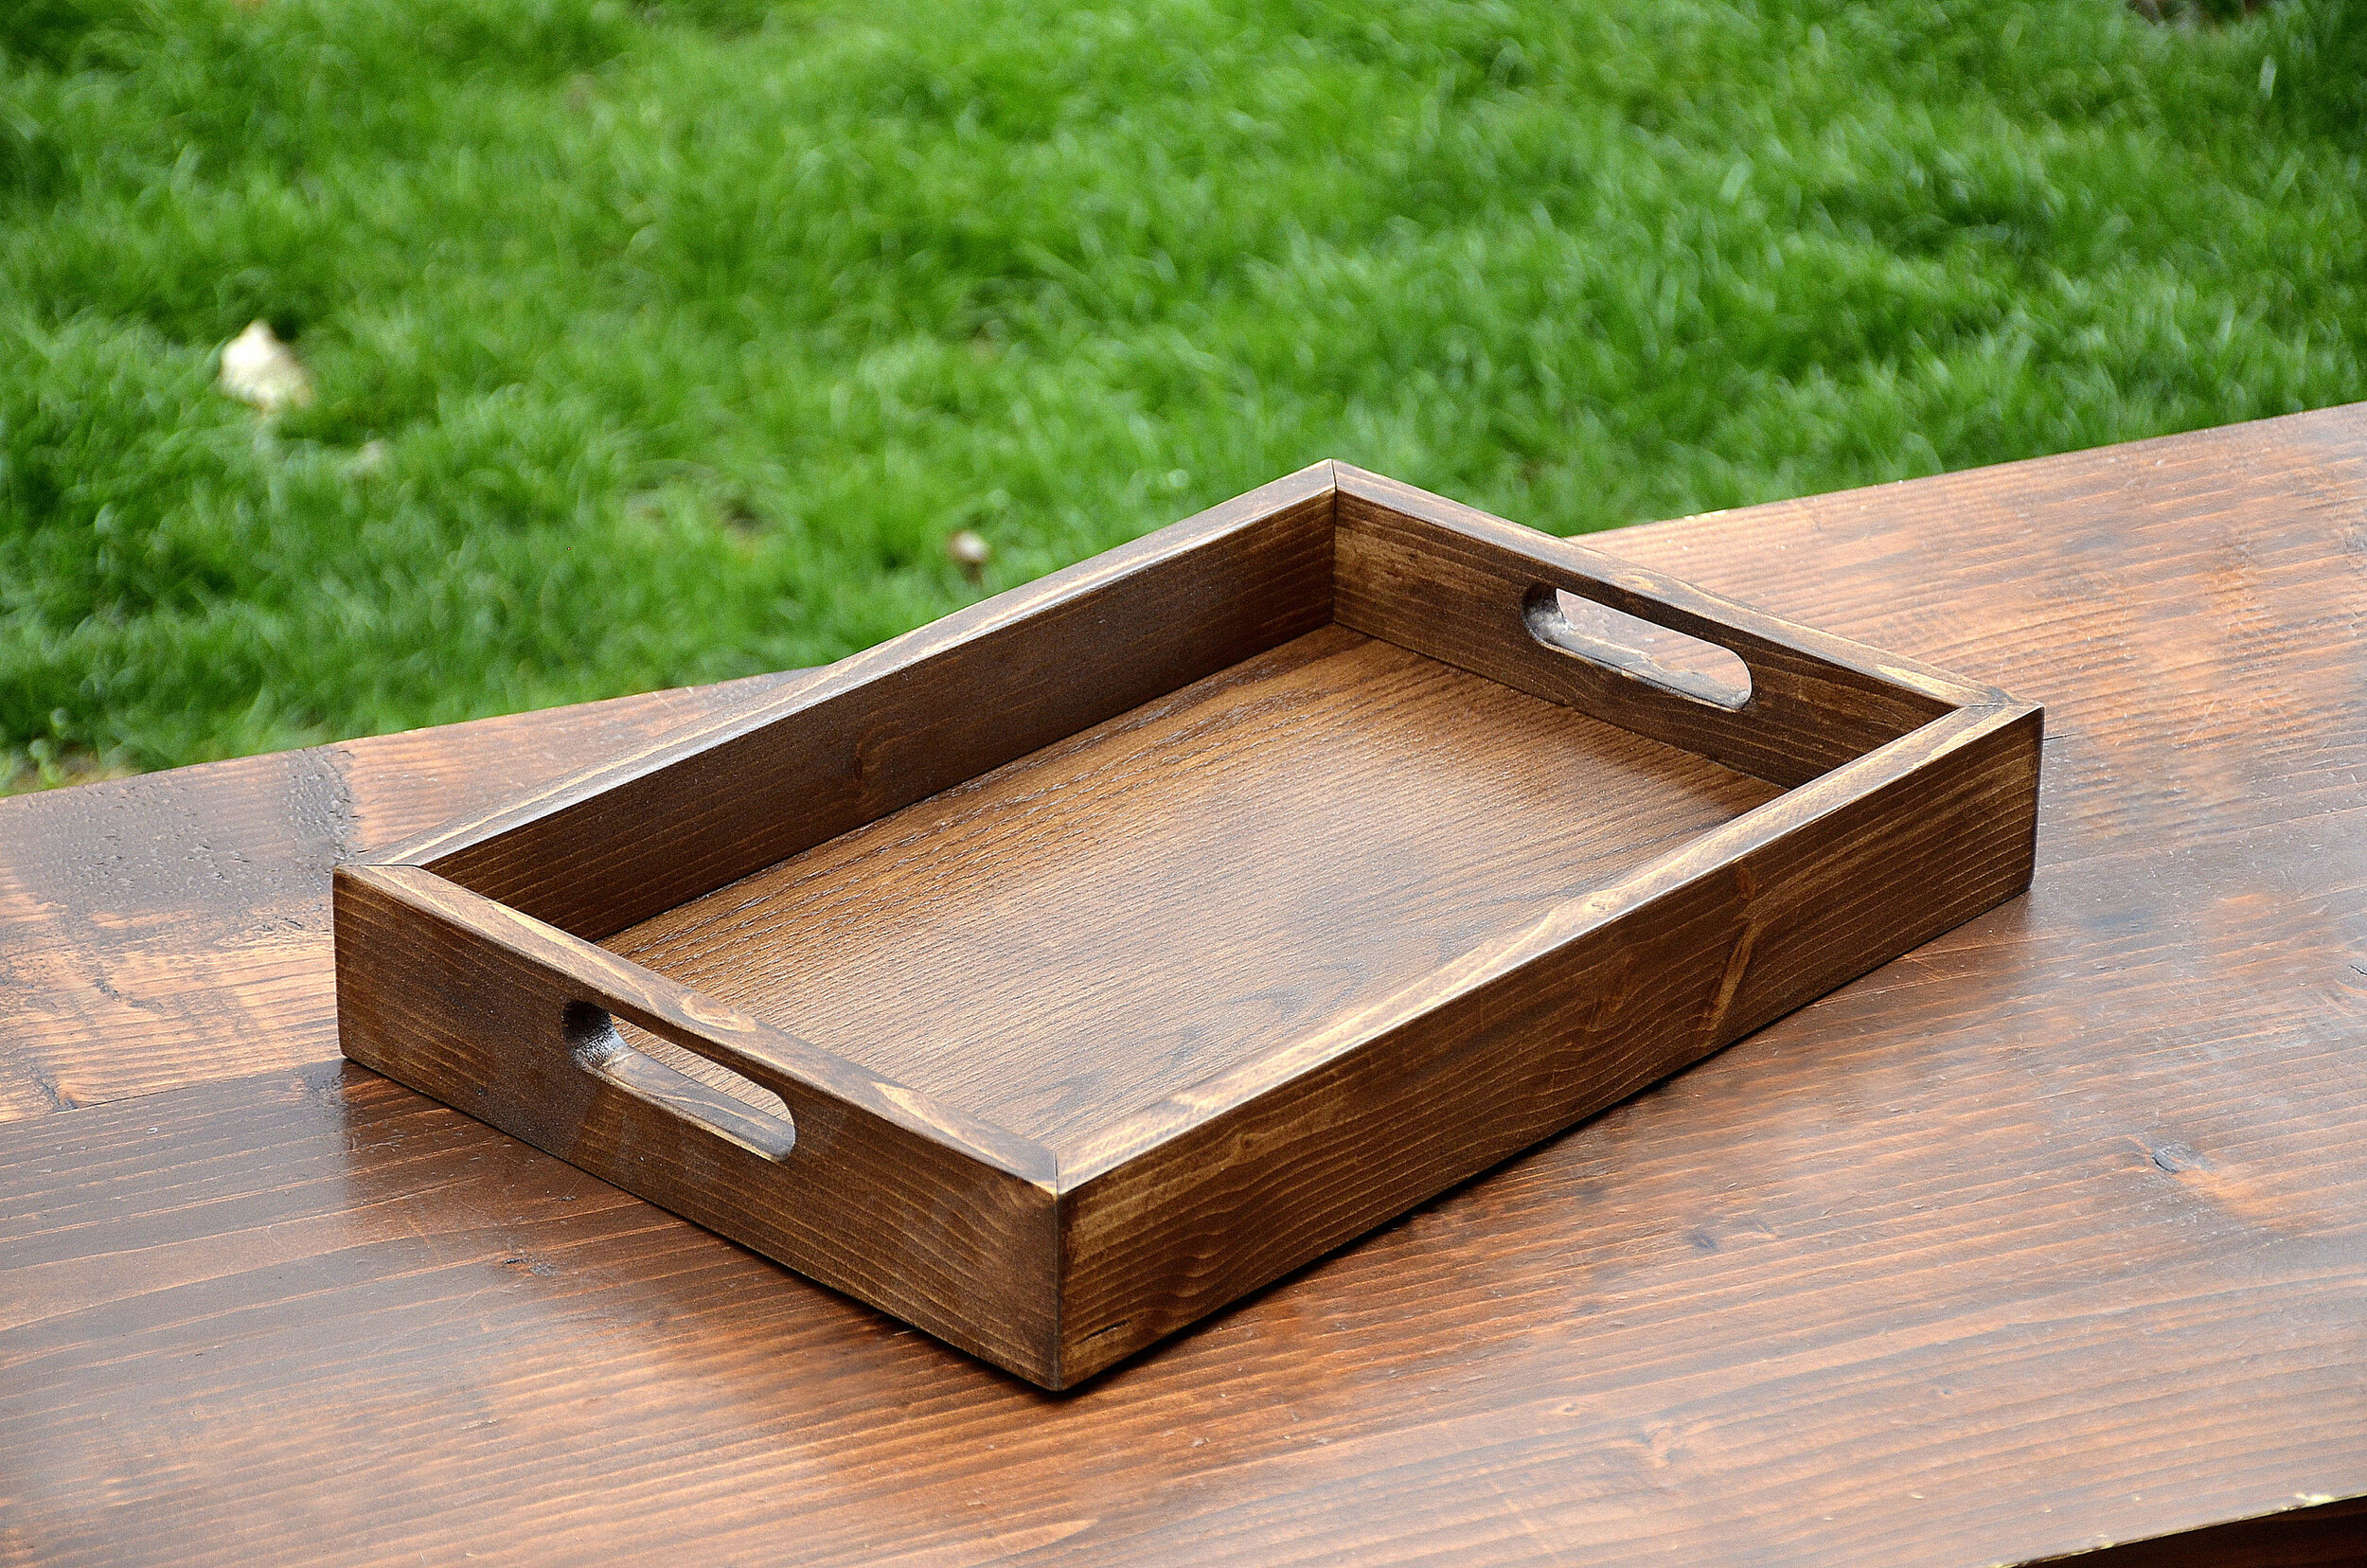 Tray for Ottoman Coffee Table Ottoman Tray Decorative Wooden Tray Rustic Serving Tray With Cut Out Handles Farmhouse Tray Coffee table Tray Moudja Wooden tray 16.53 x 12.20